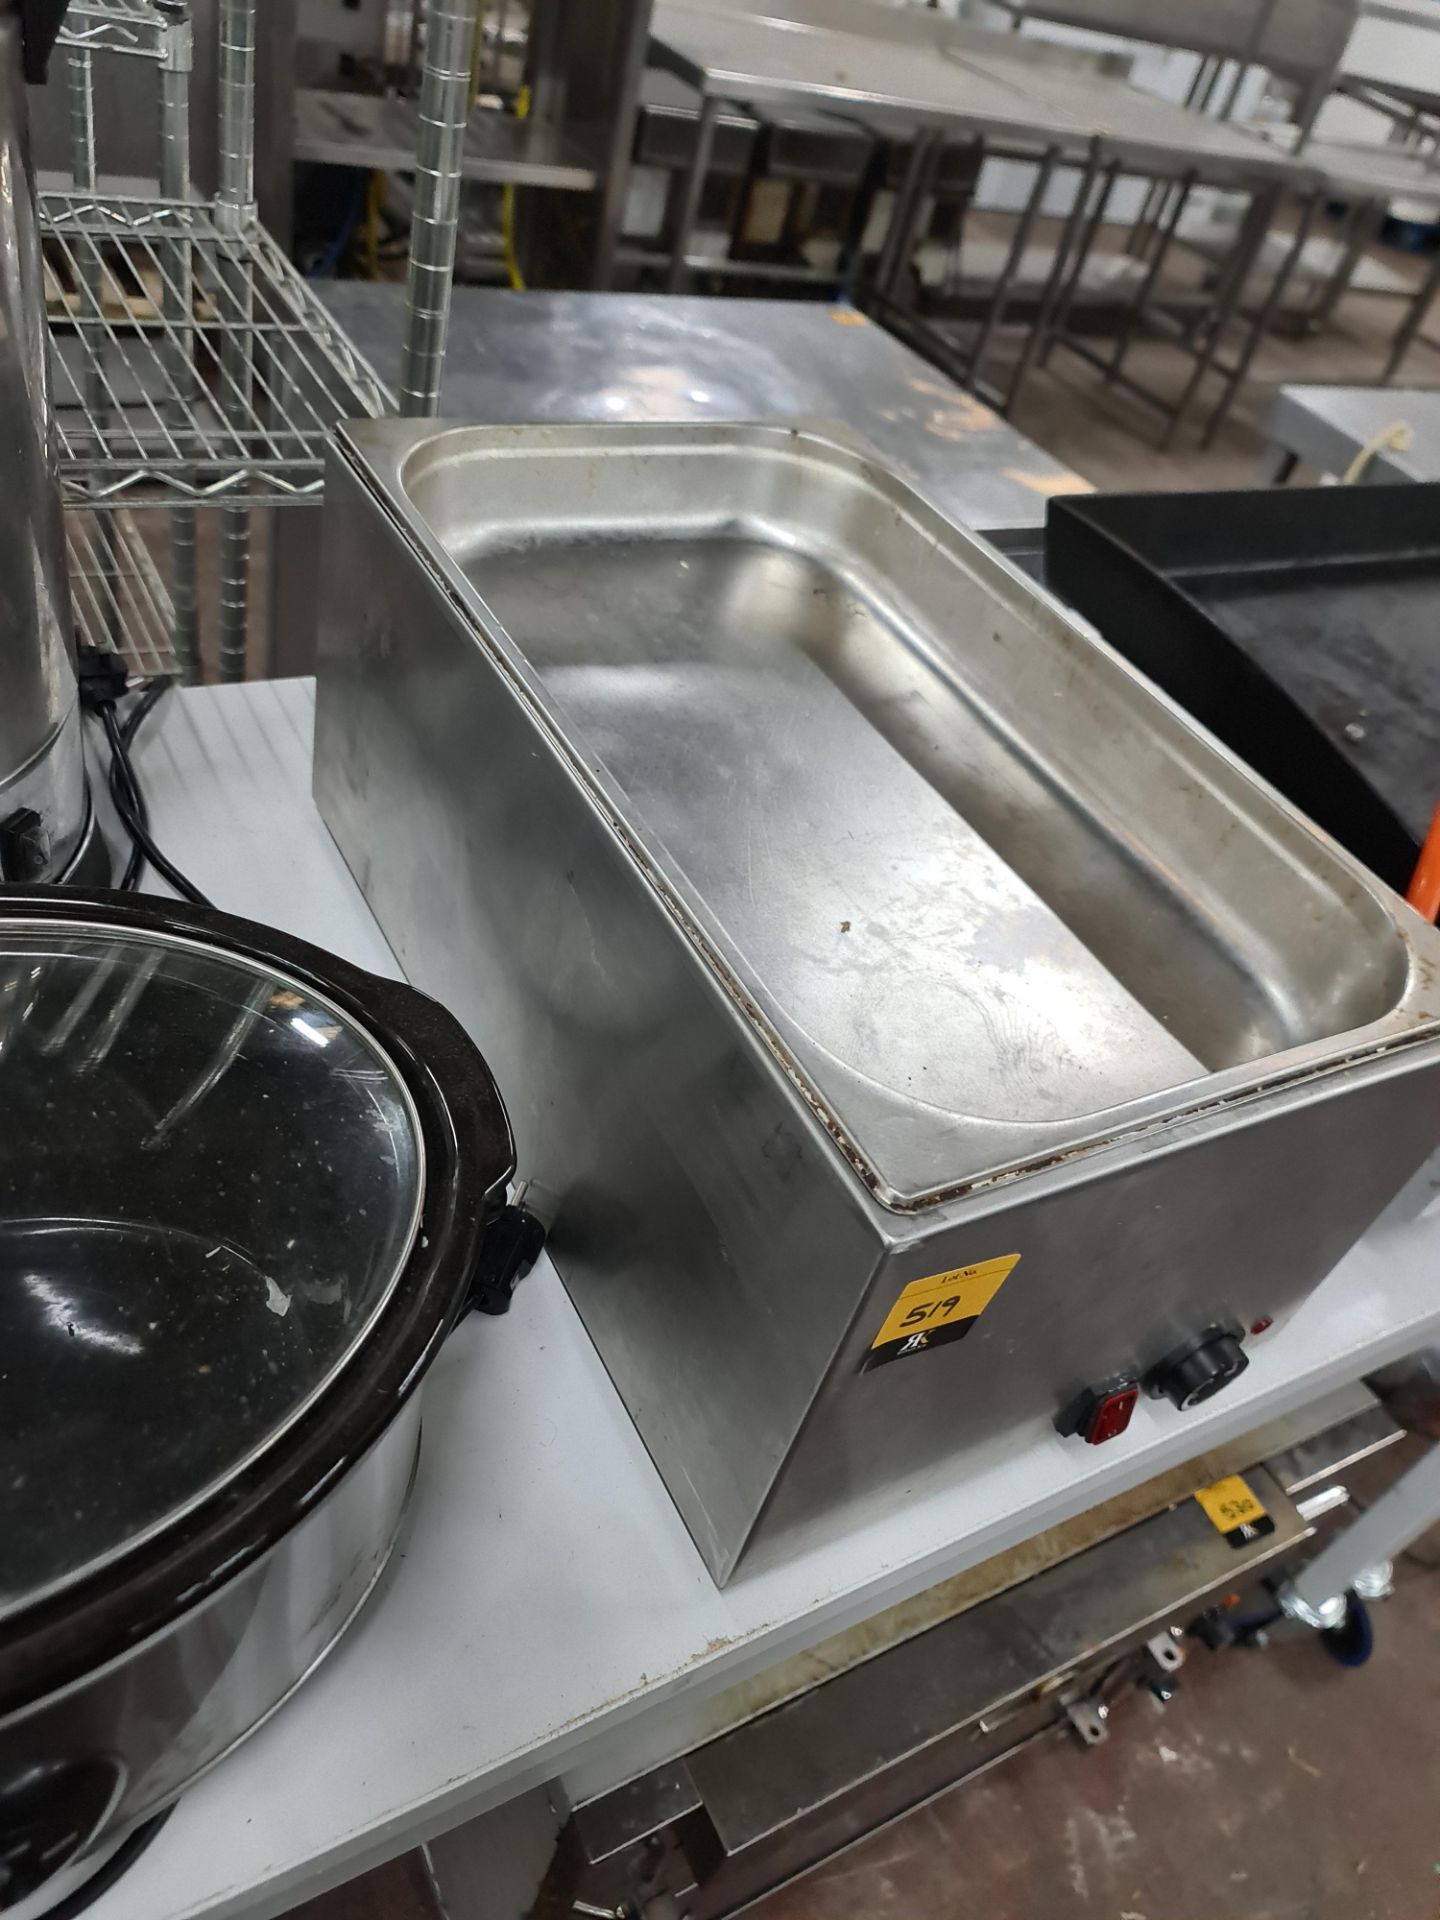 Bench top stainless steel bain marie/warming unit - Image 3 of 3